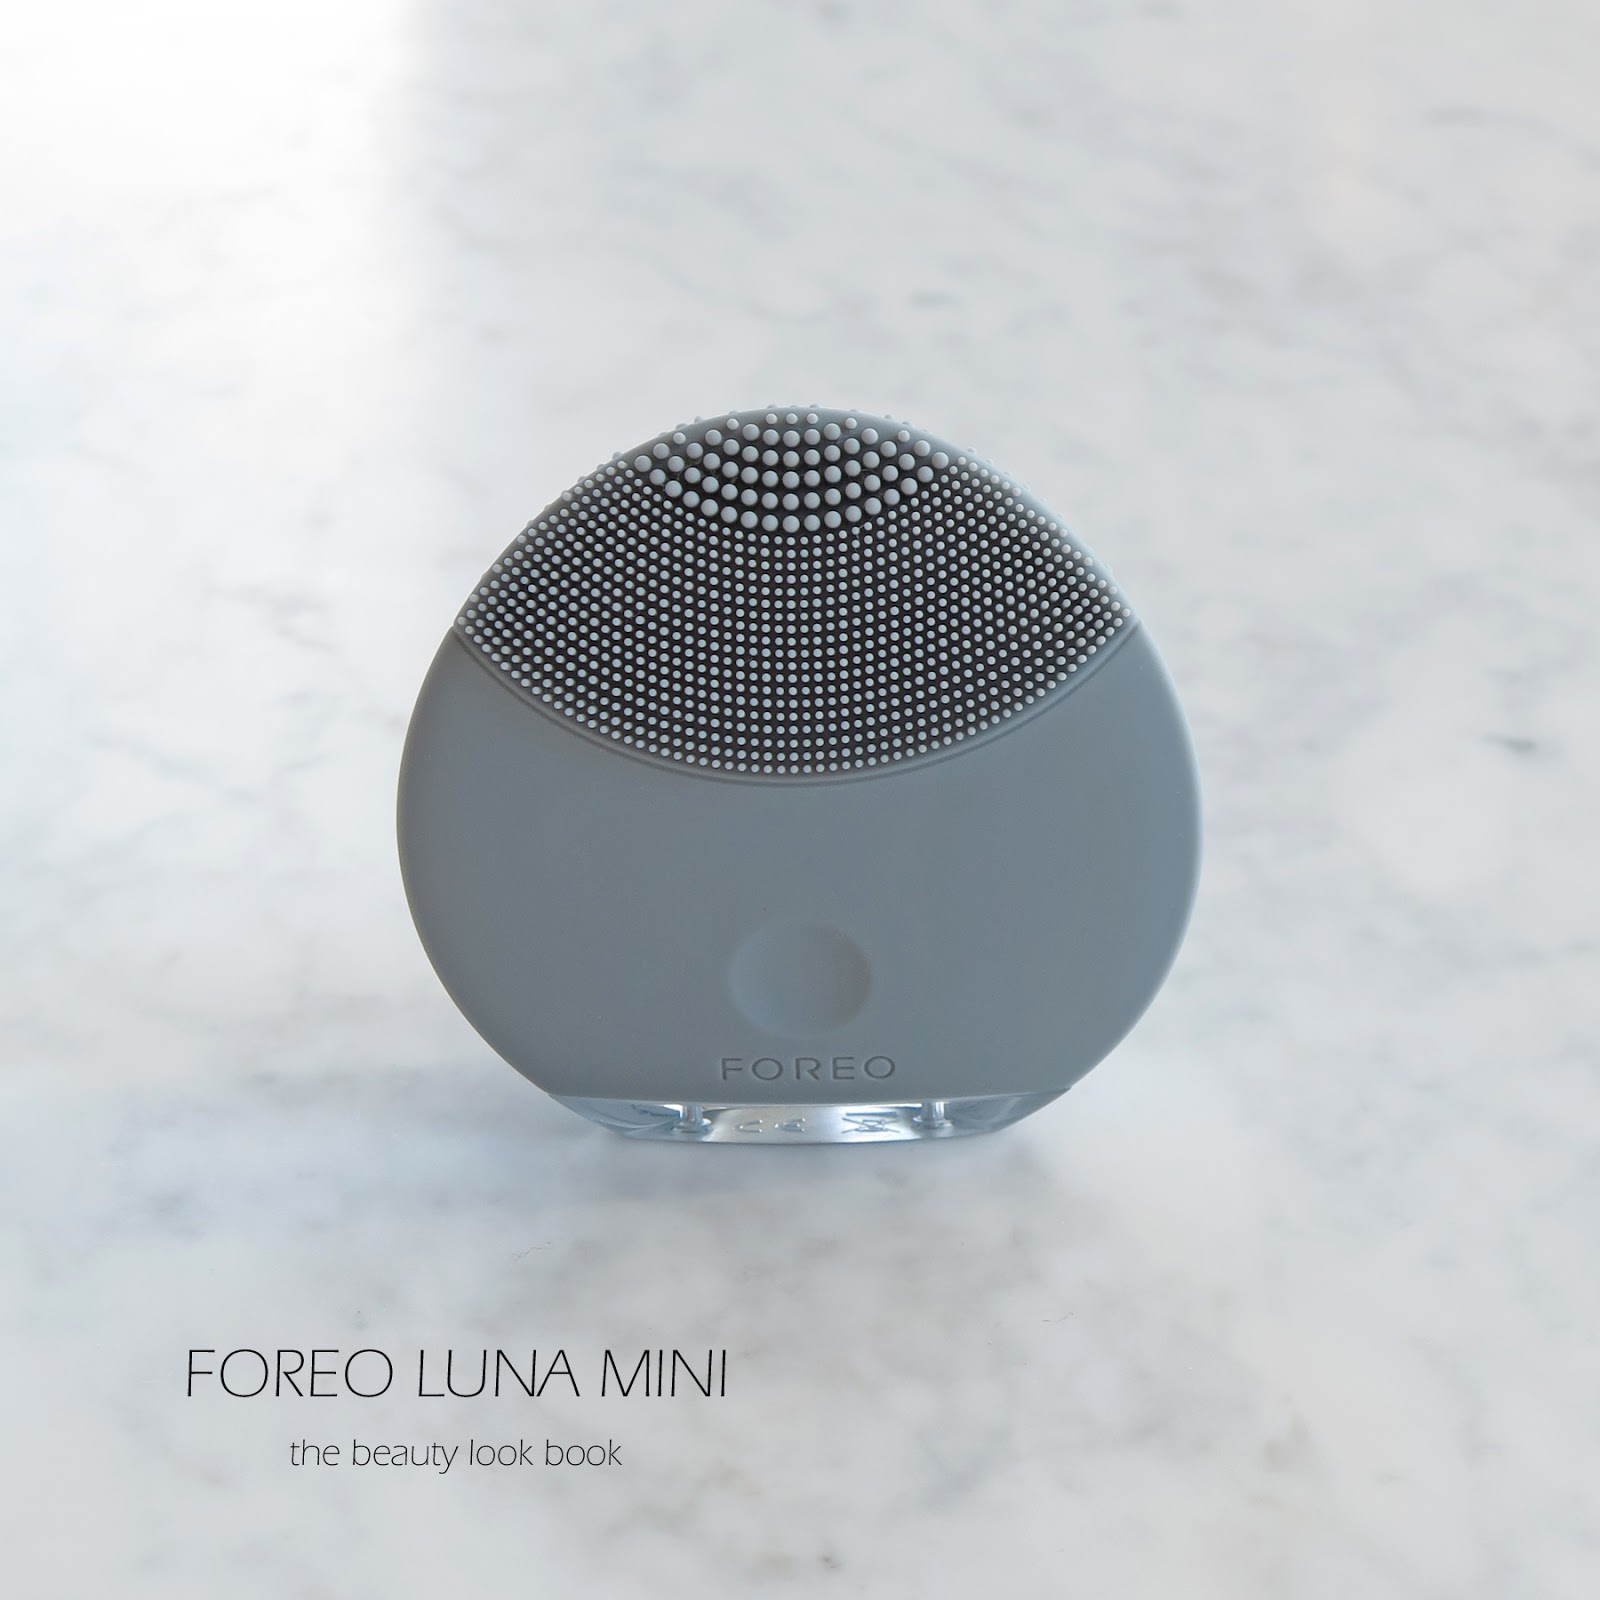 Skincare Cleaning Devices Foreo Luna Mini And Le Mieux 4 In 1 Ultrasonic Anti Aging Skin Perfecter The Beauty Look Book